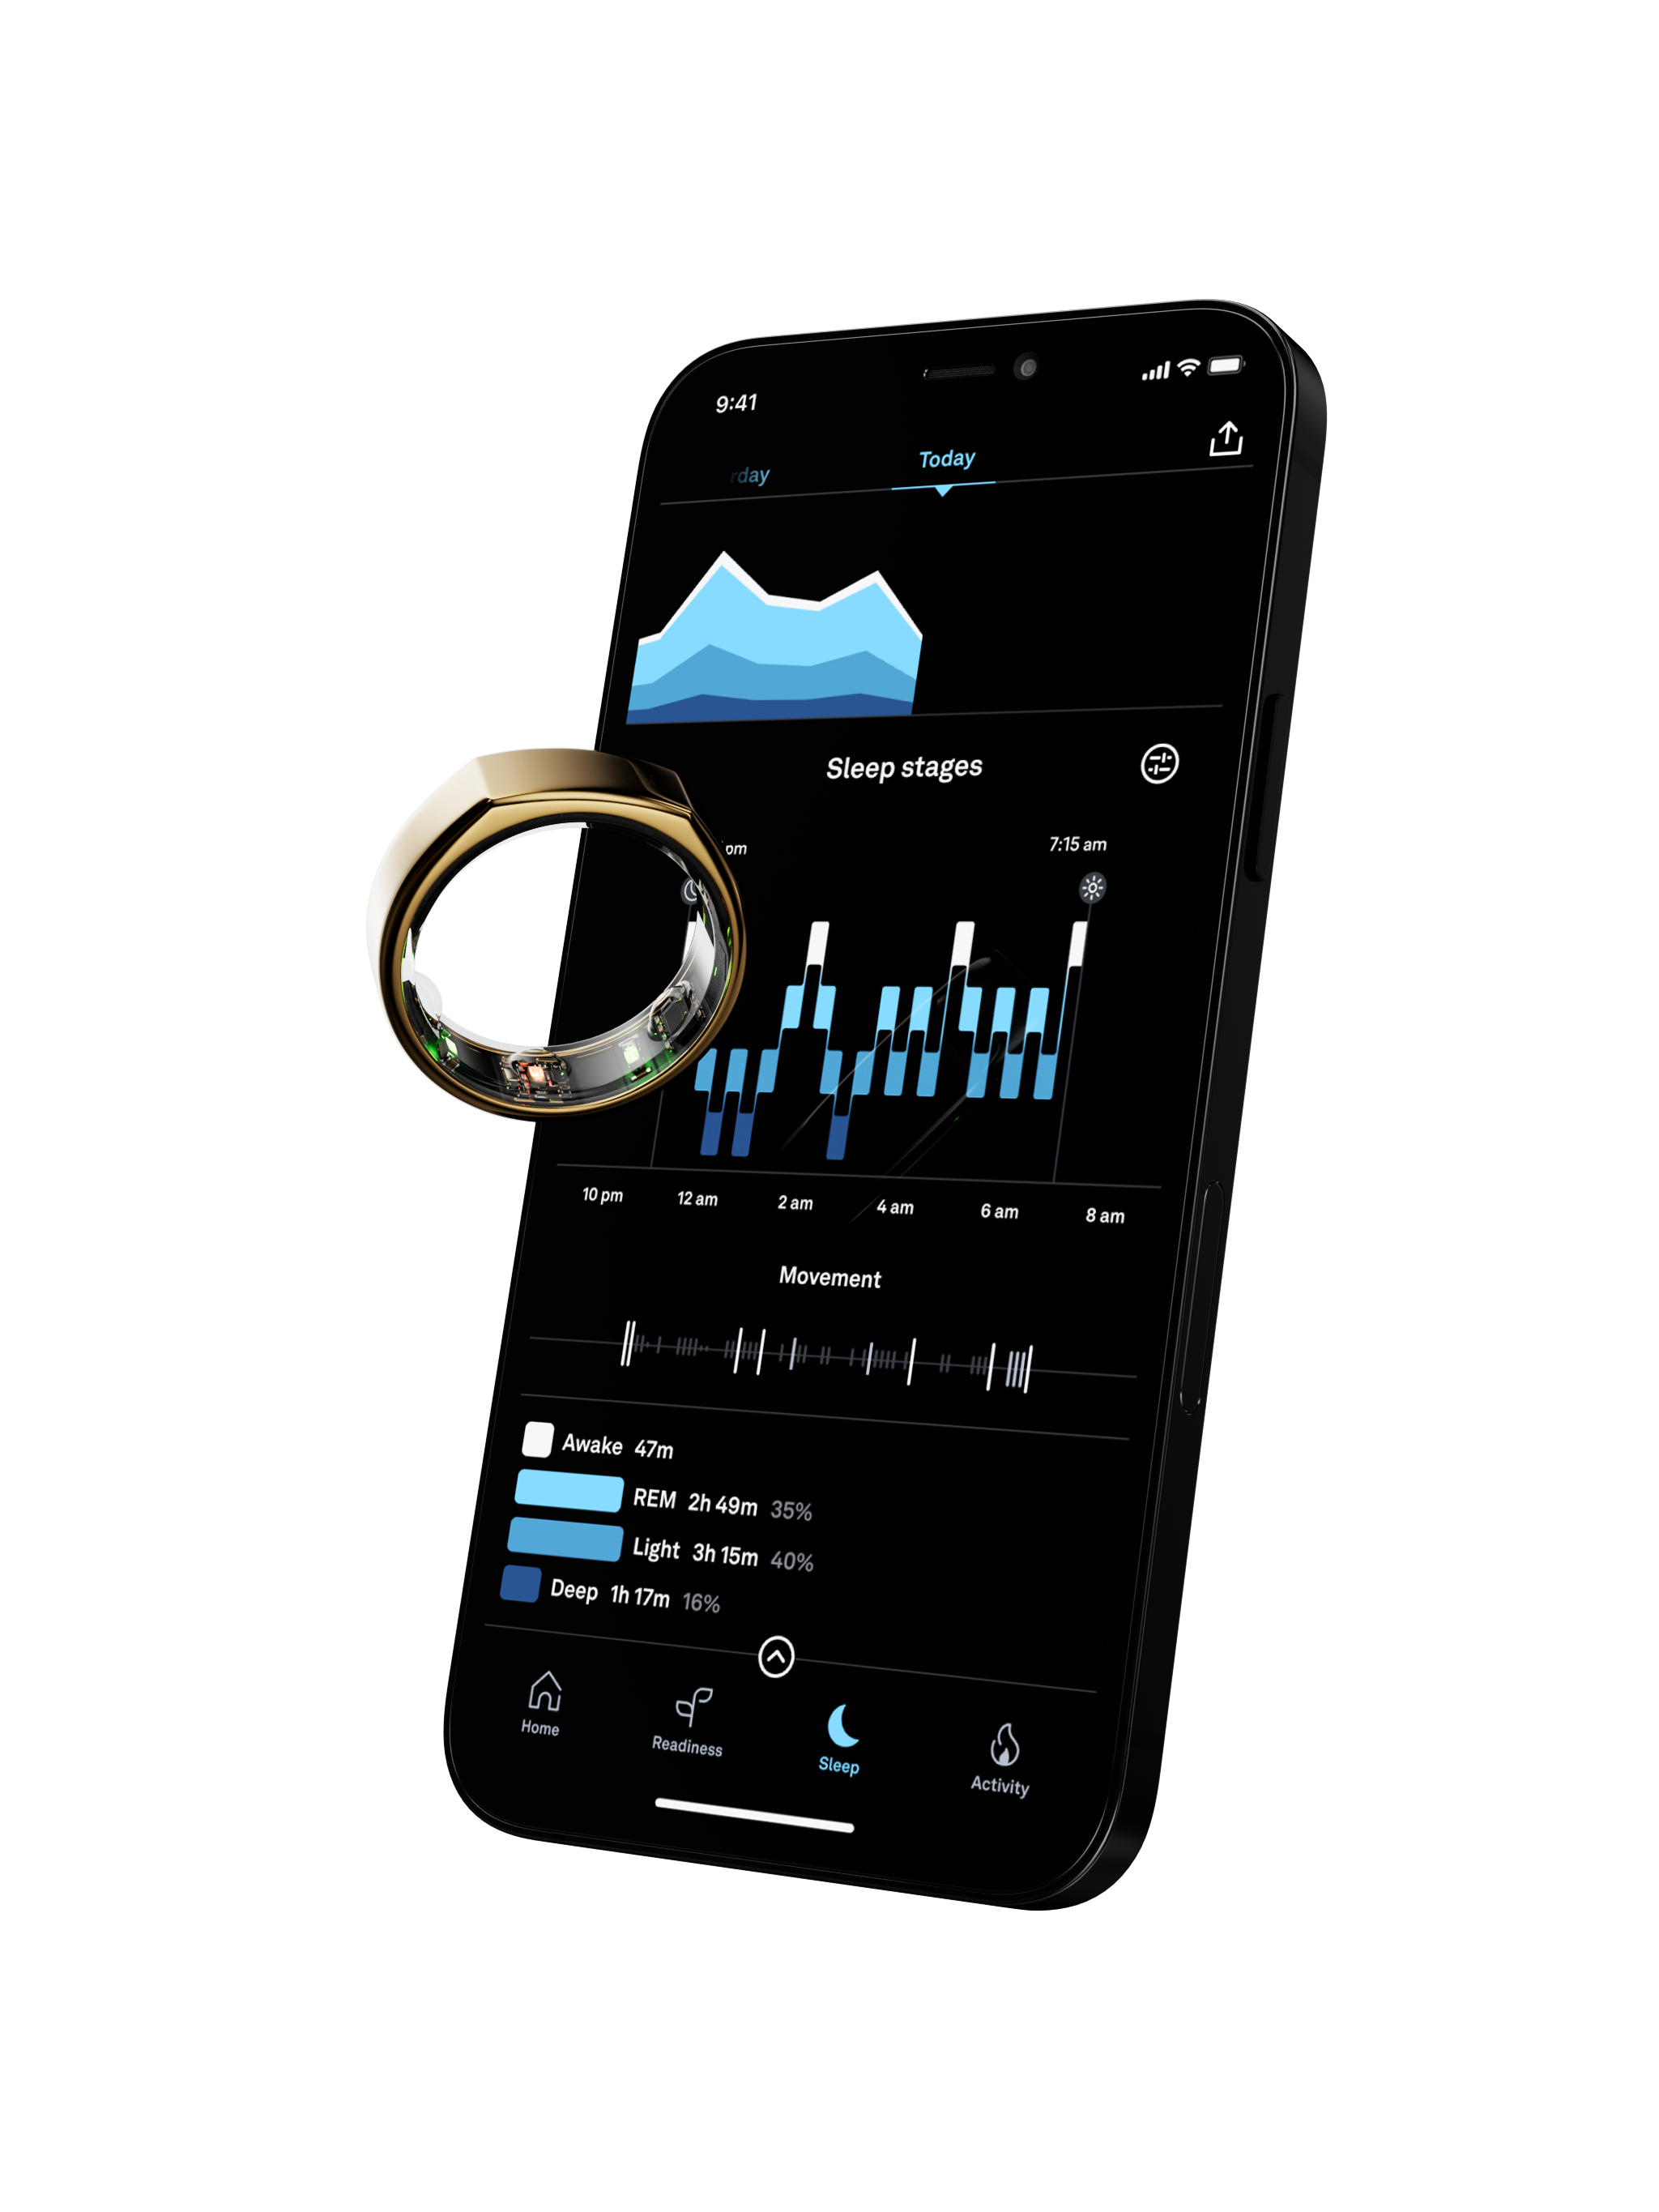 The Oura Ring and app